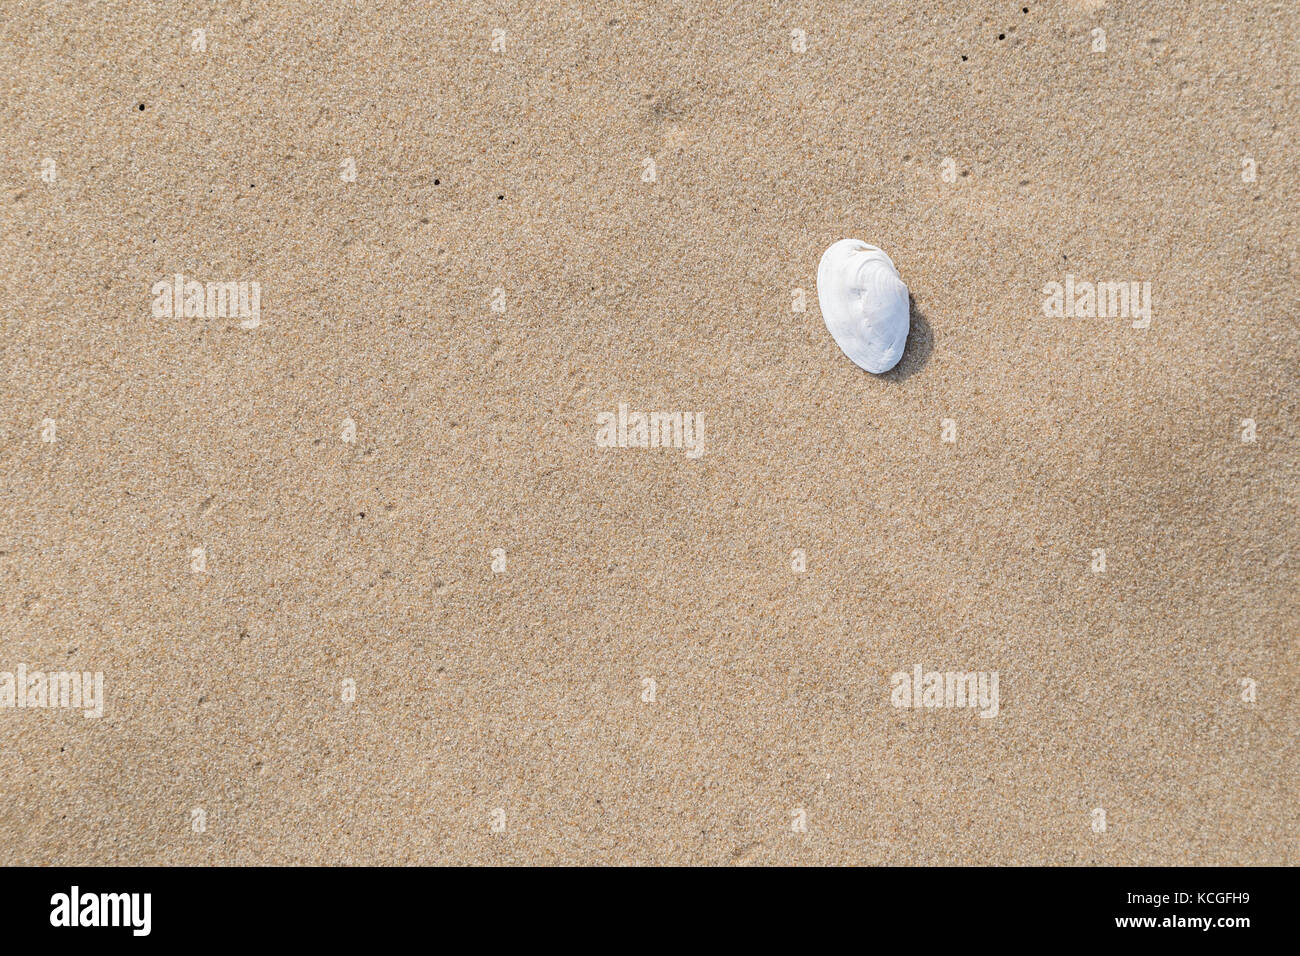 Close-up of a seashell and smooth sand at a beach texture background. Stock Photo